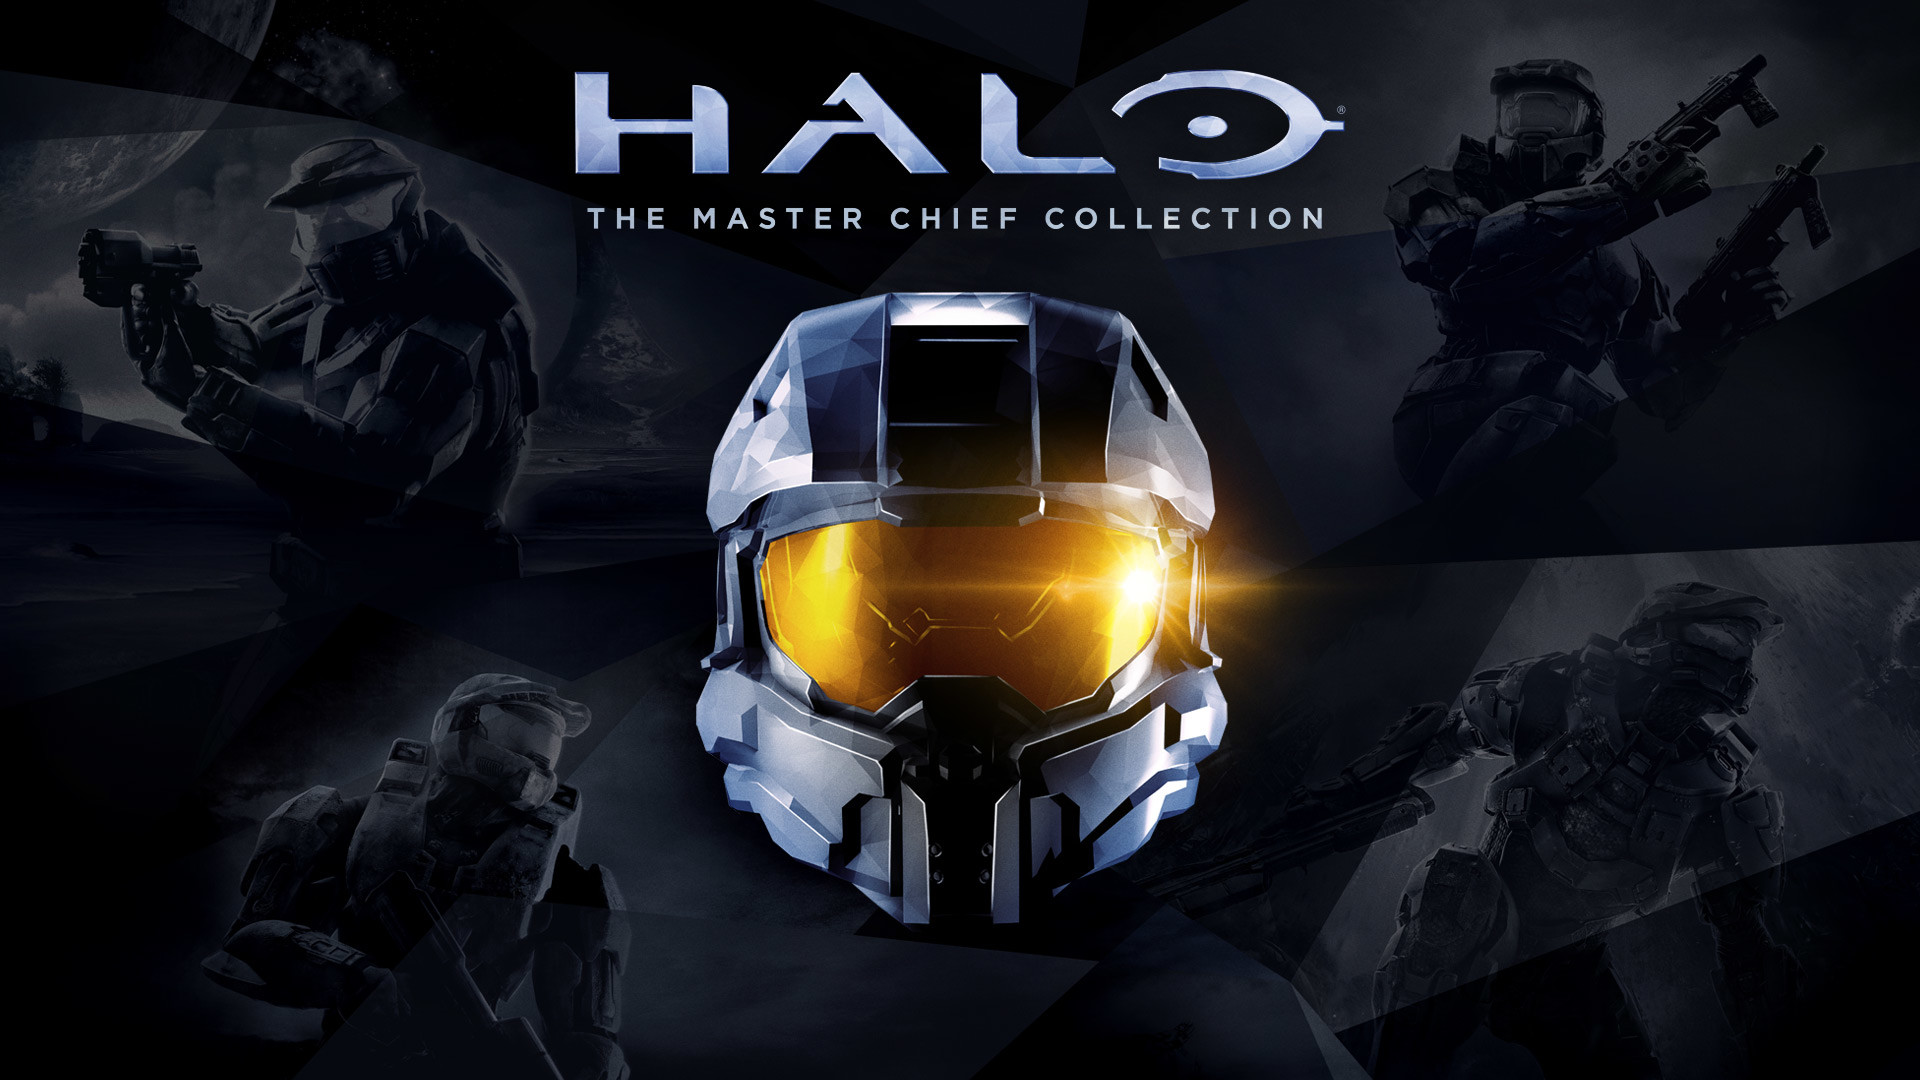 1920x1080 Master Chief Halo 5 Guardians wallpapers (54 Wallpapers) – HD Wallpapers